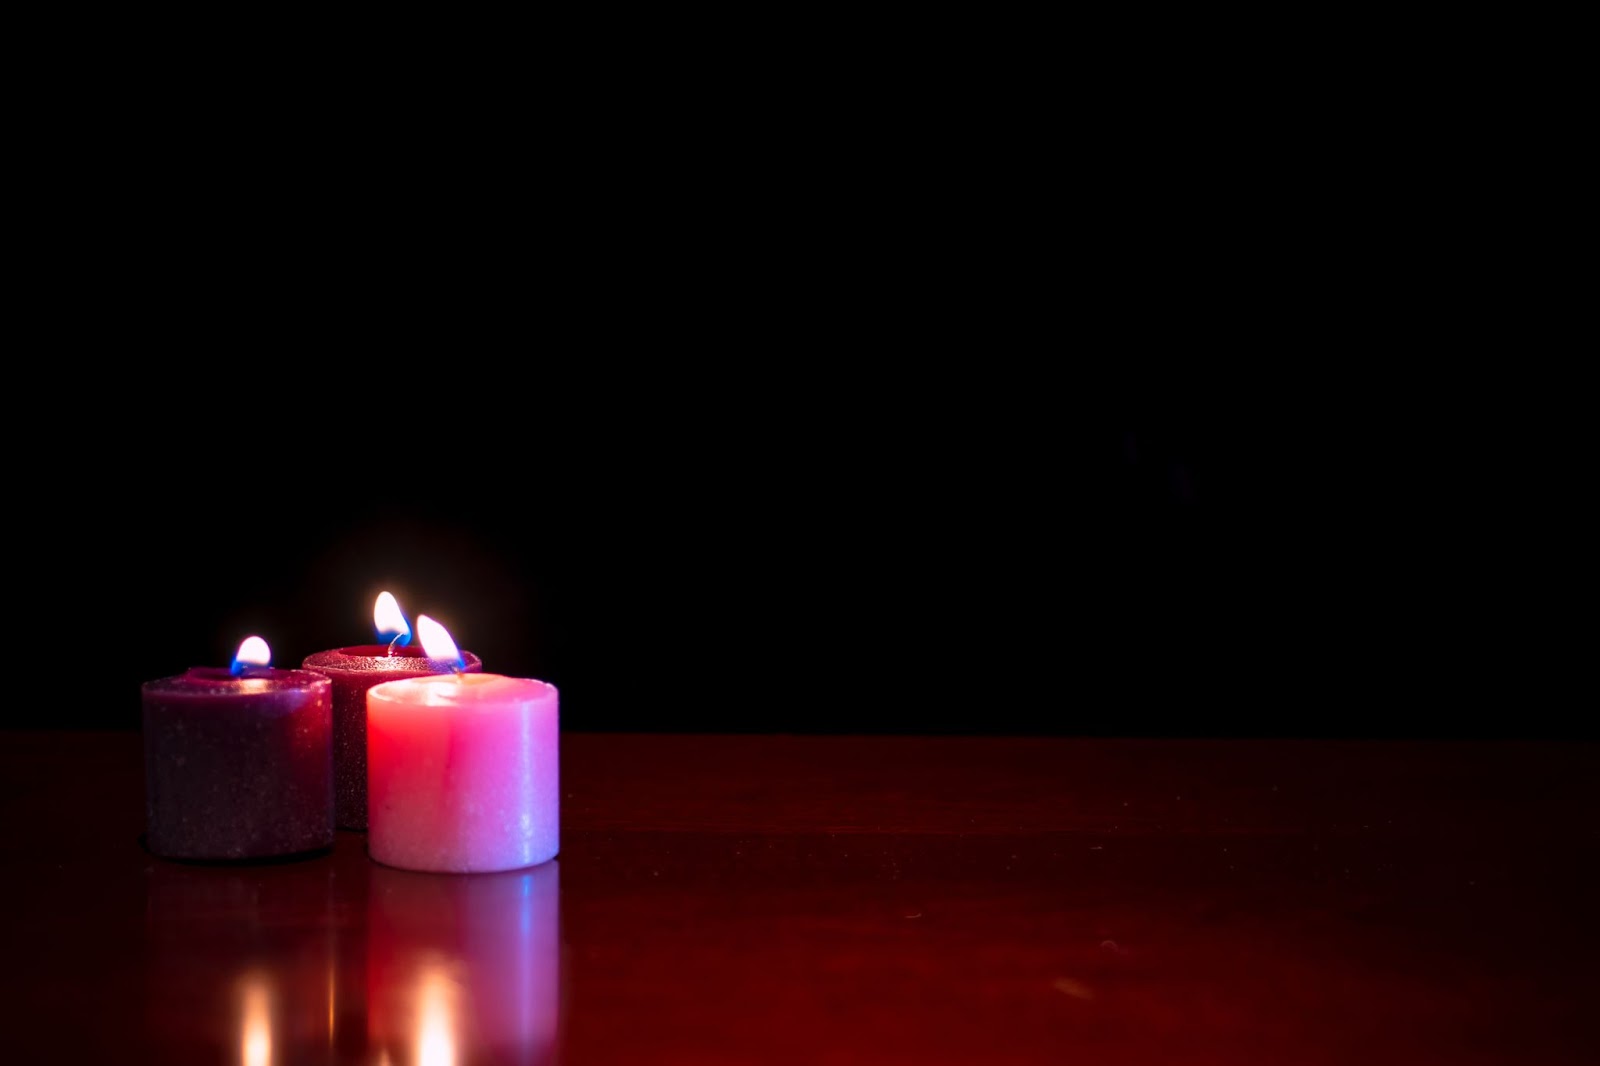 Two purple and one pink candles burning on a hardwood floor with a black background.